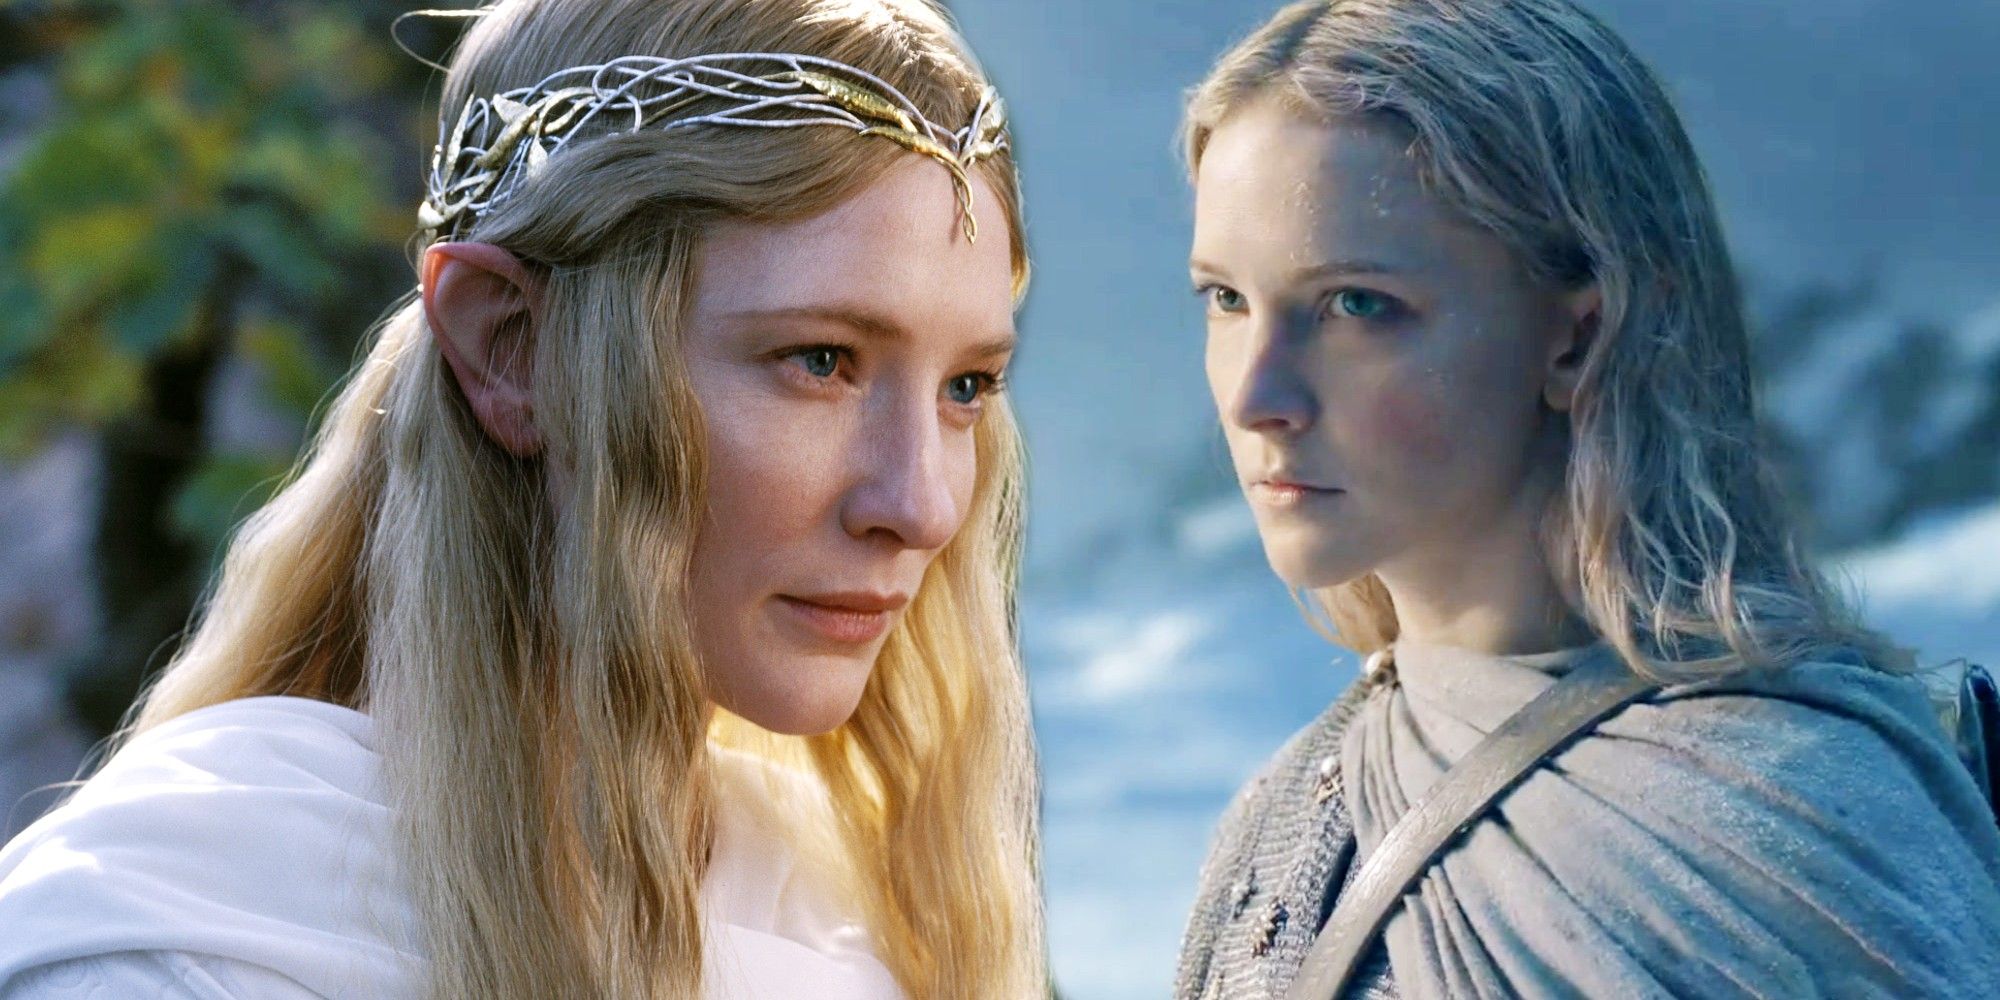 Lord of the Rings The Rings of Power Cate Blanchett and Morfydd Clark as Galadriel